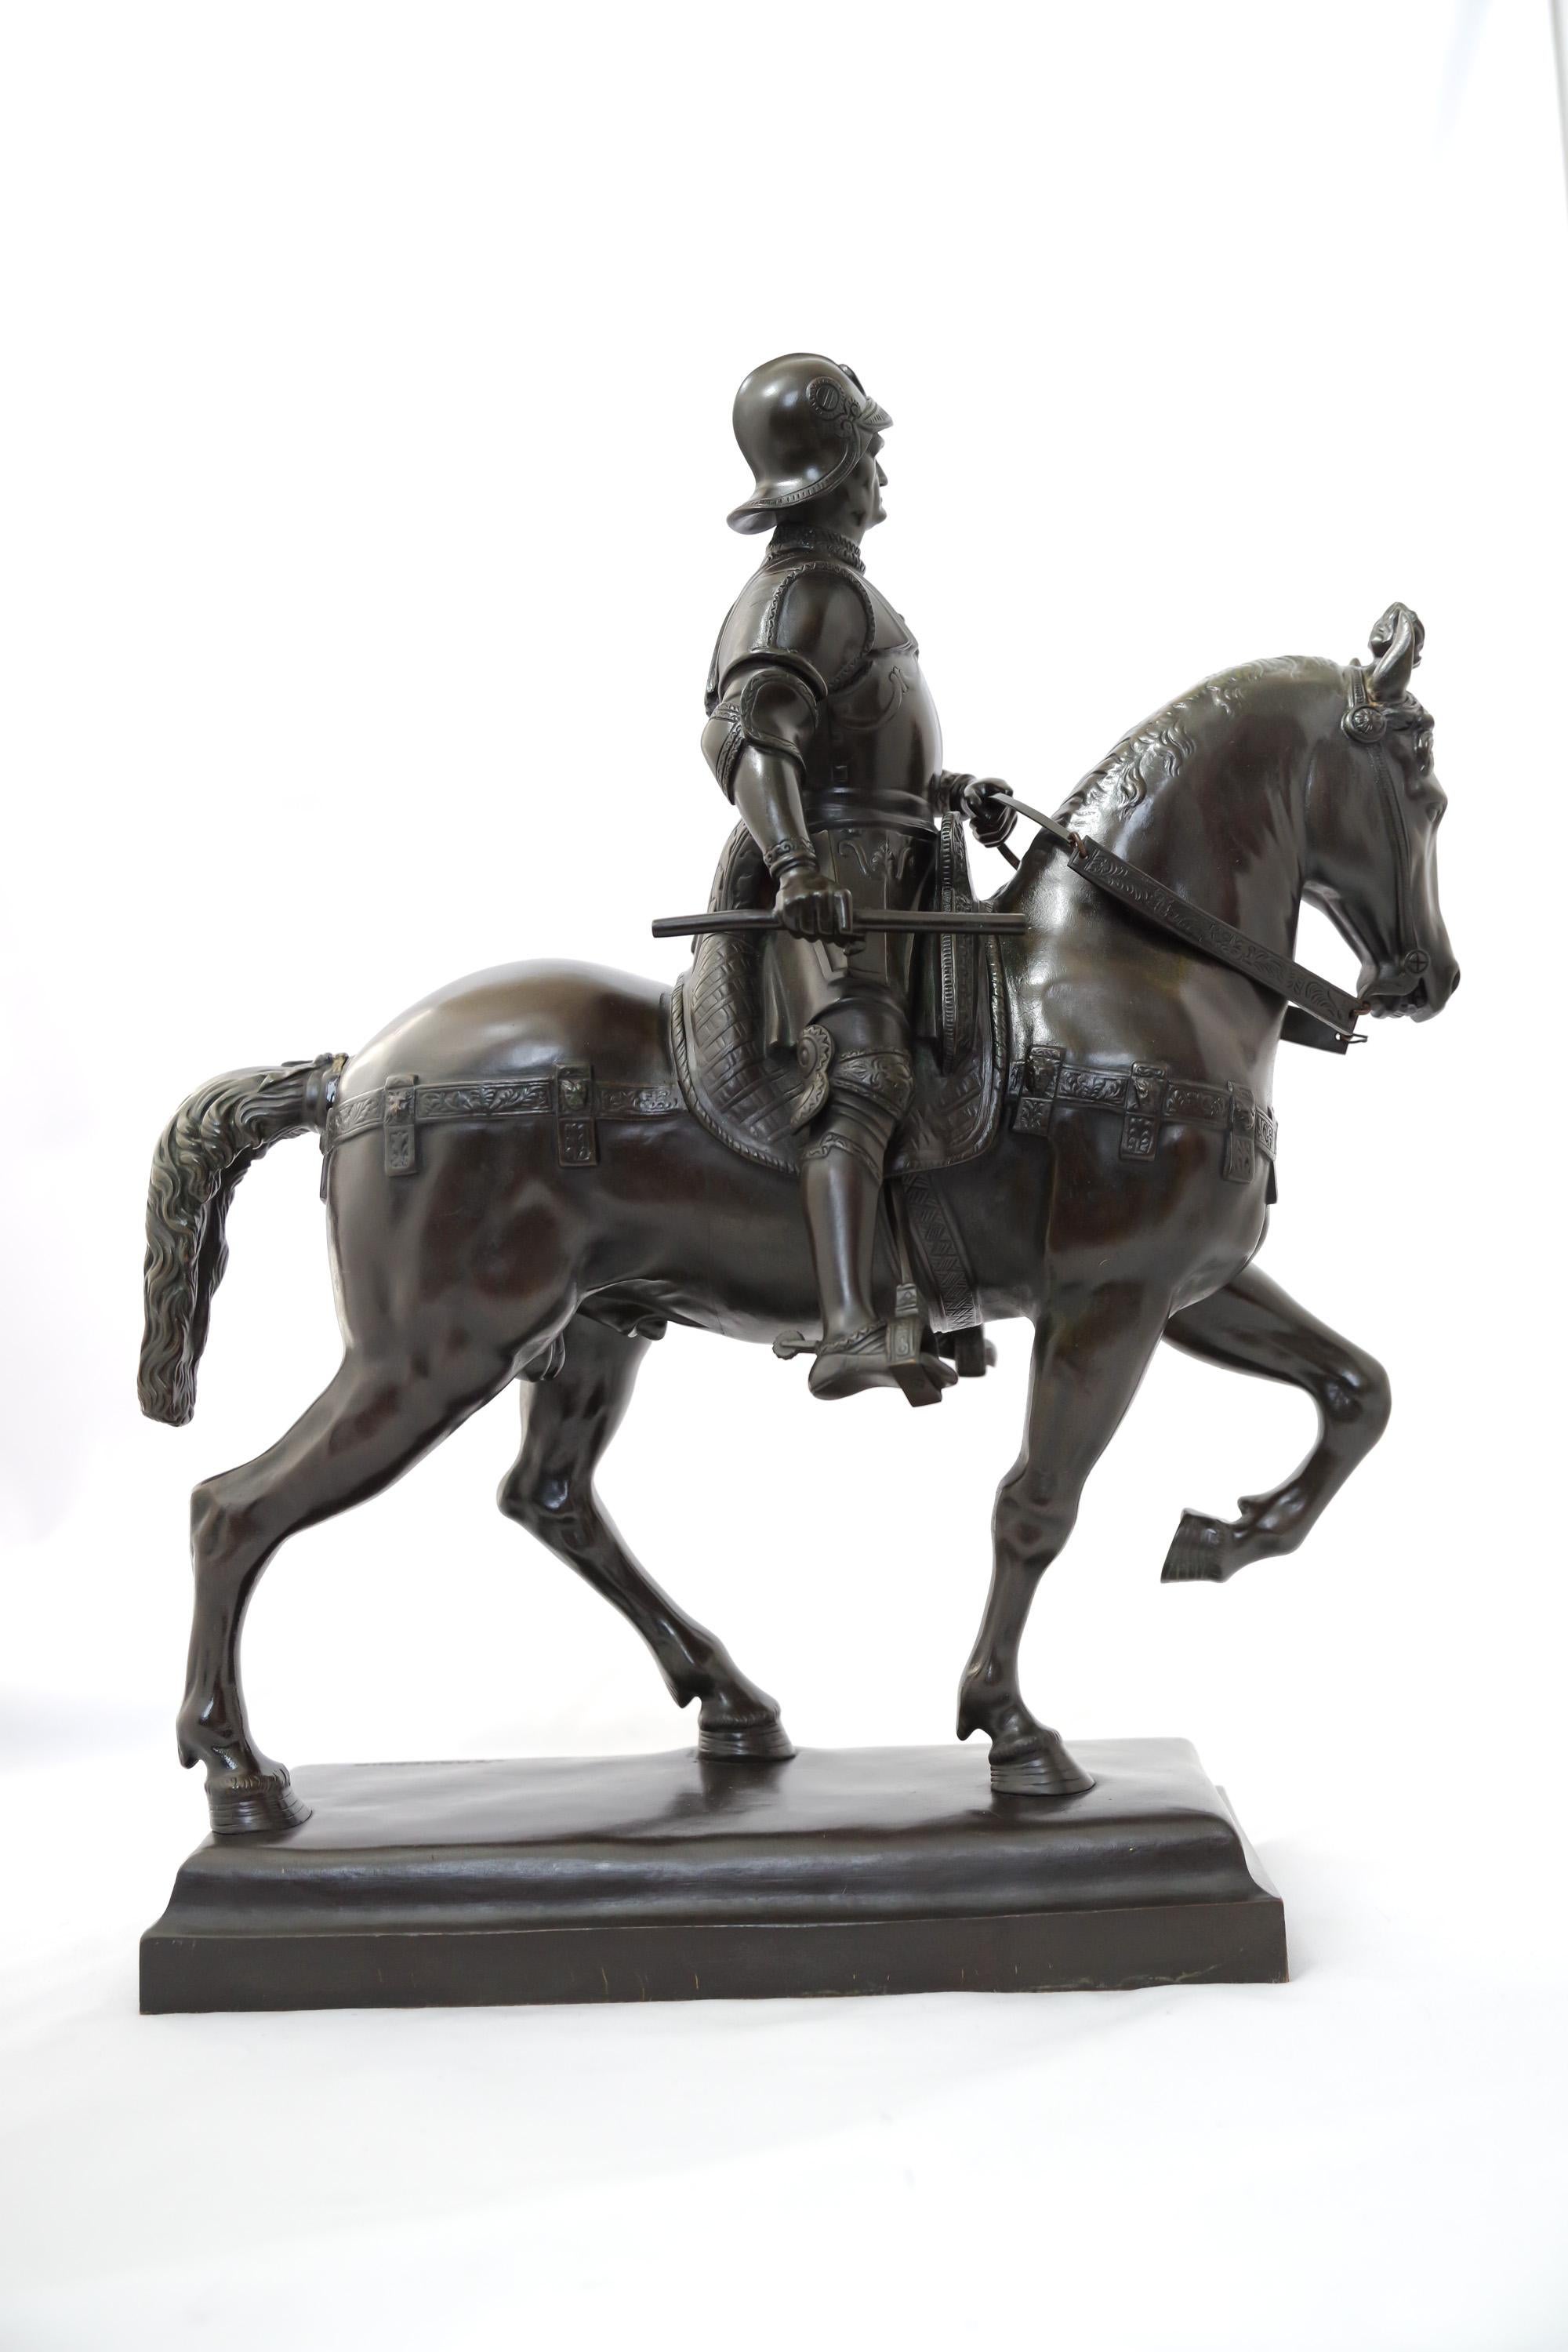 Patinated 19th Century Bronze Equestrian Sculpture of Colleoni by Barbedienne Foundry